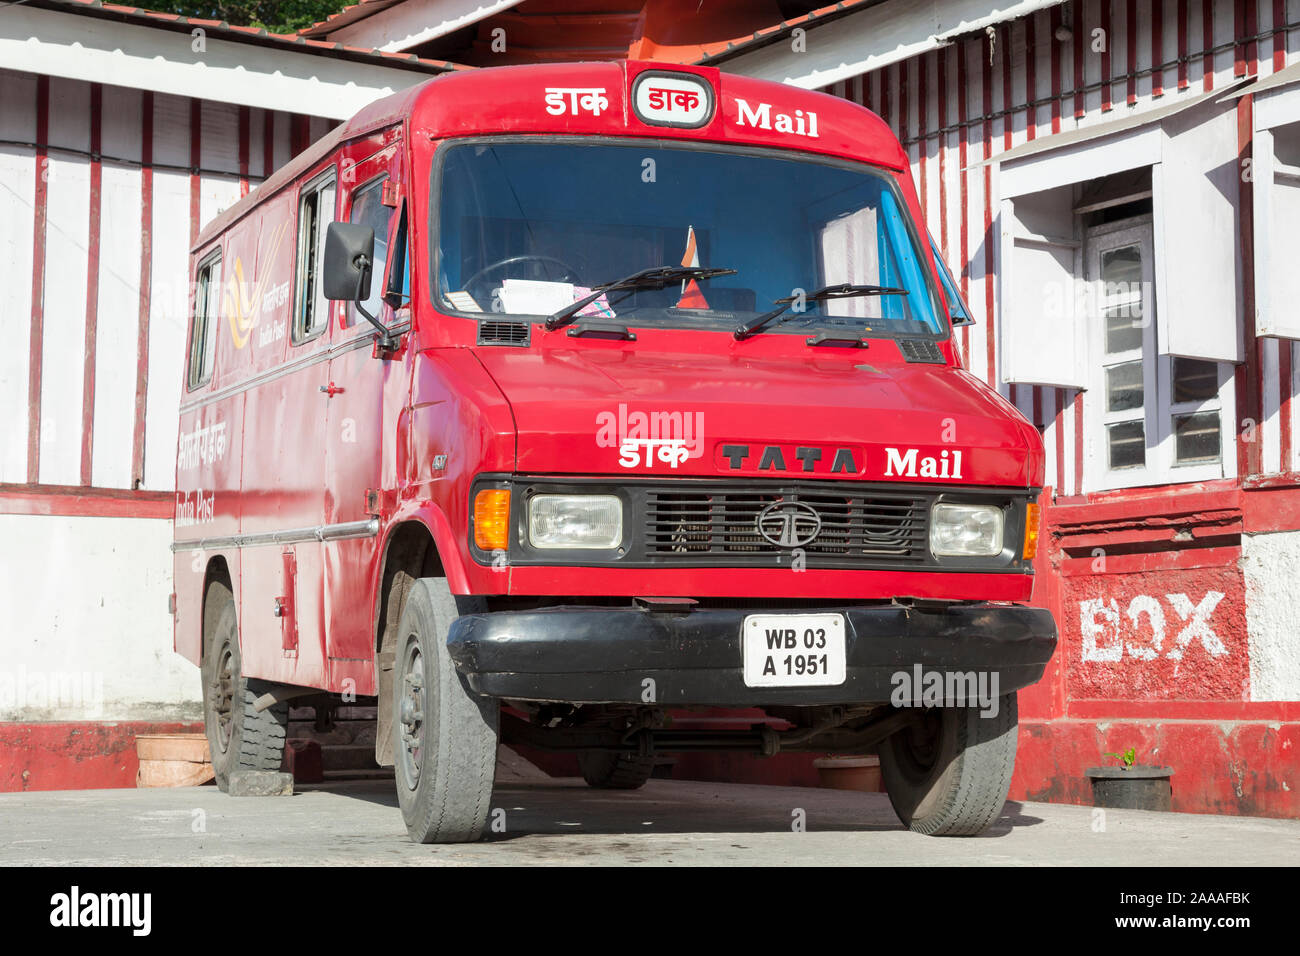 Postal delivery van of India Post at the Port Blair city post office, Andaman and Nicobar Islands Stock Photo